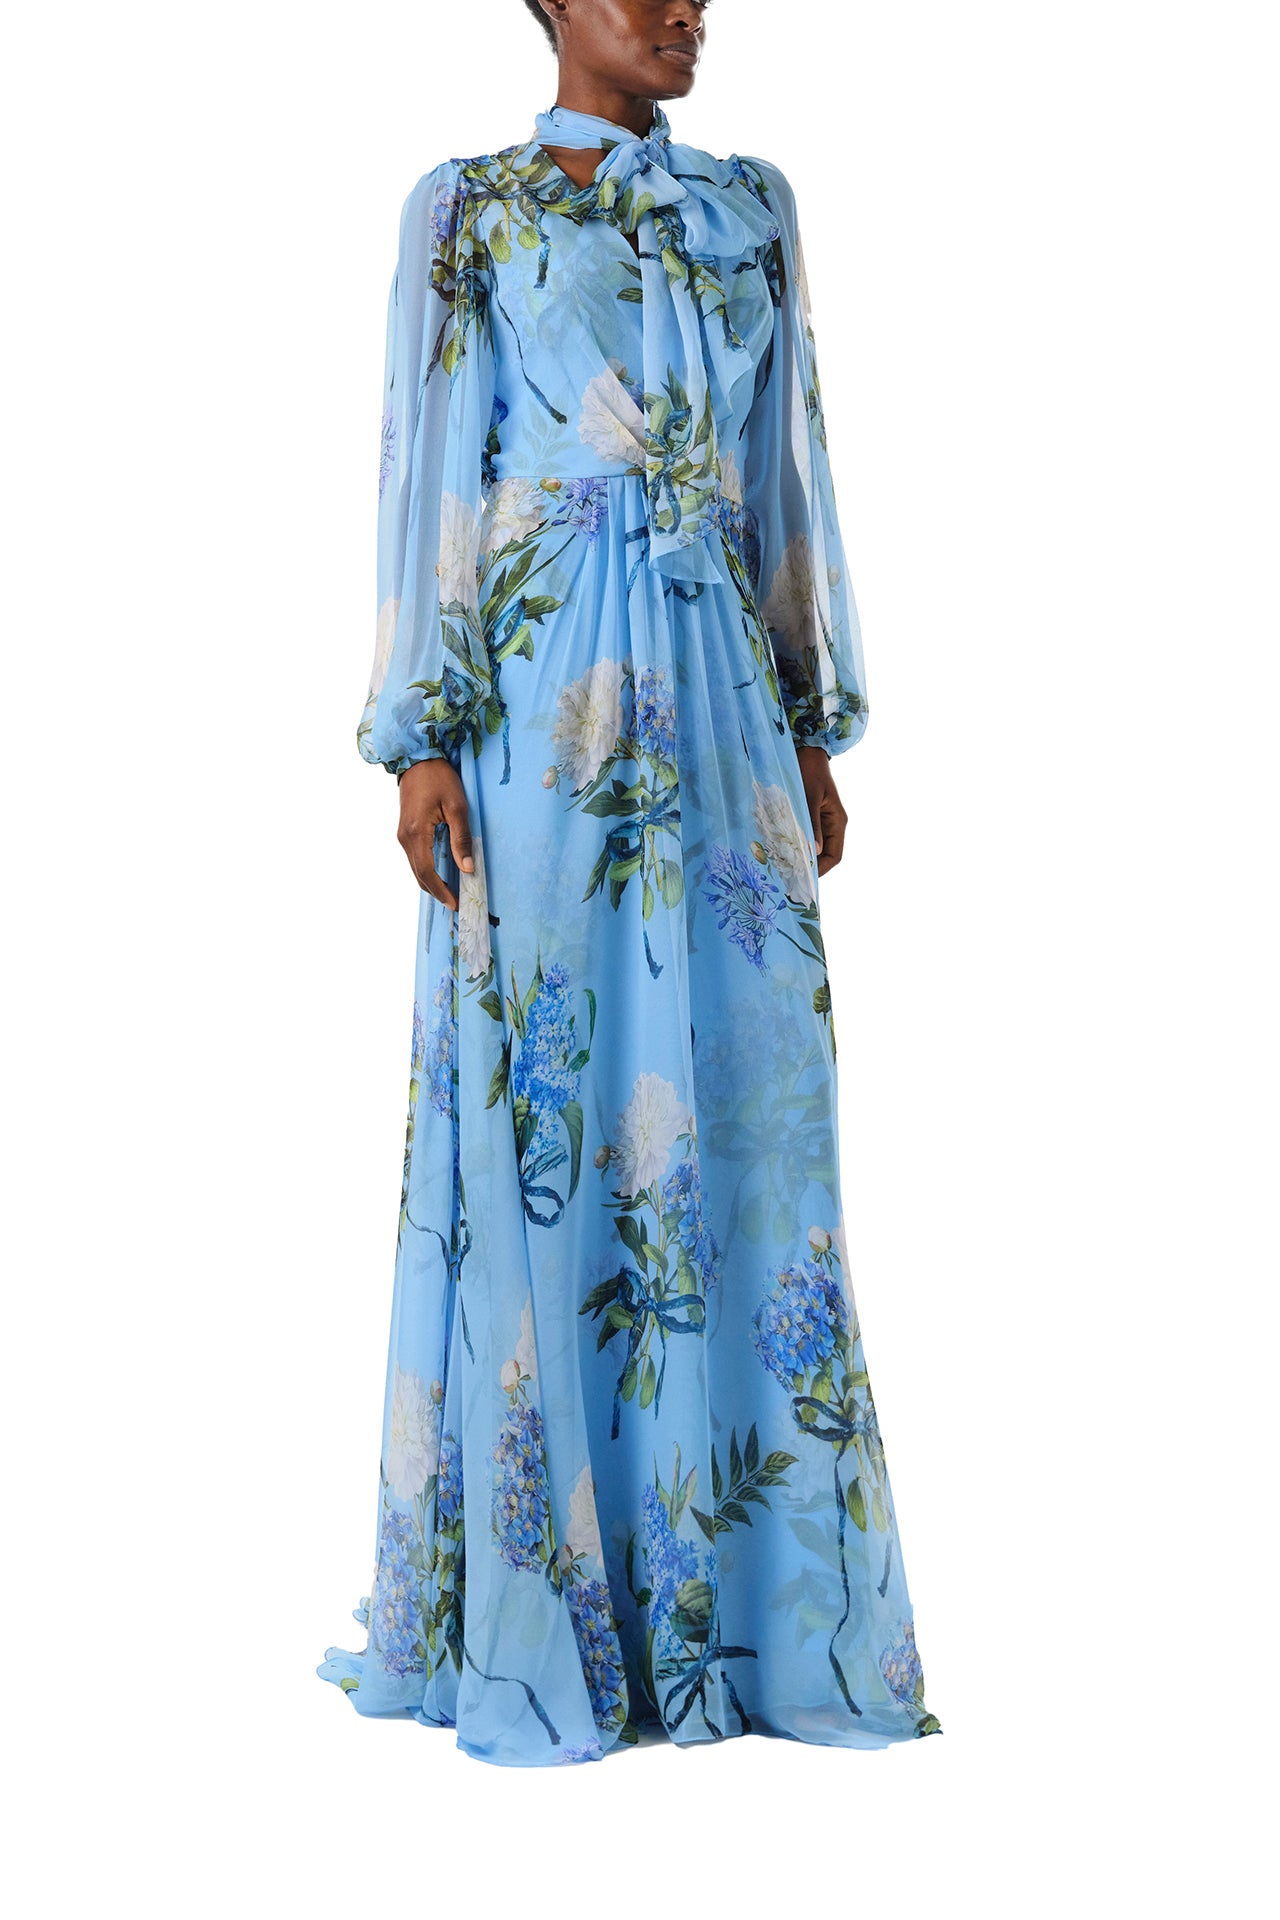 Monique Lhuillier Fall 2024 long sleeve gown in blue floral printed chiffon with self-tie neckline - right side.